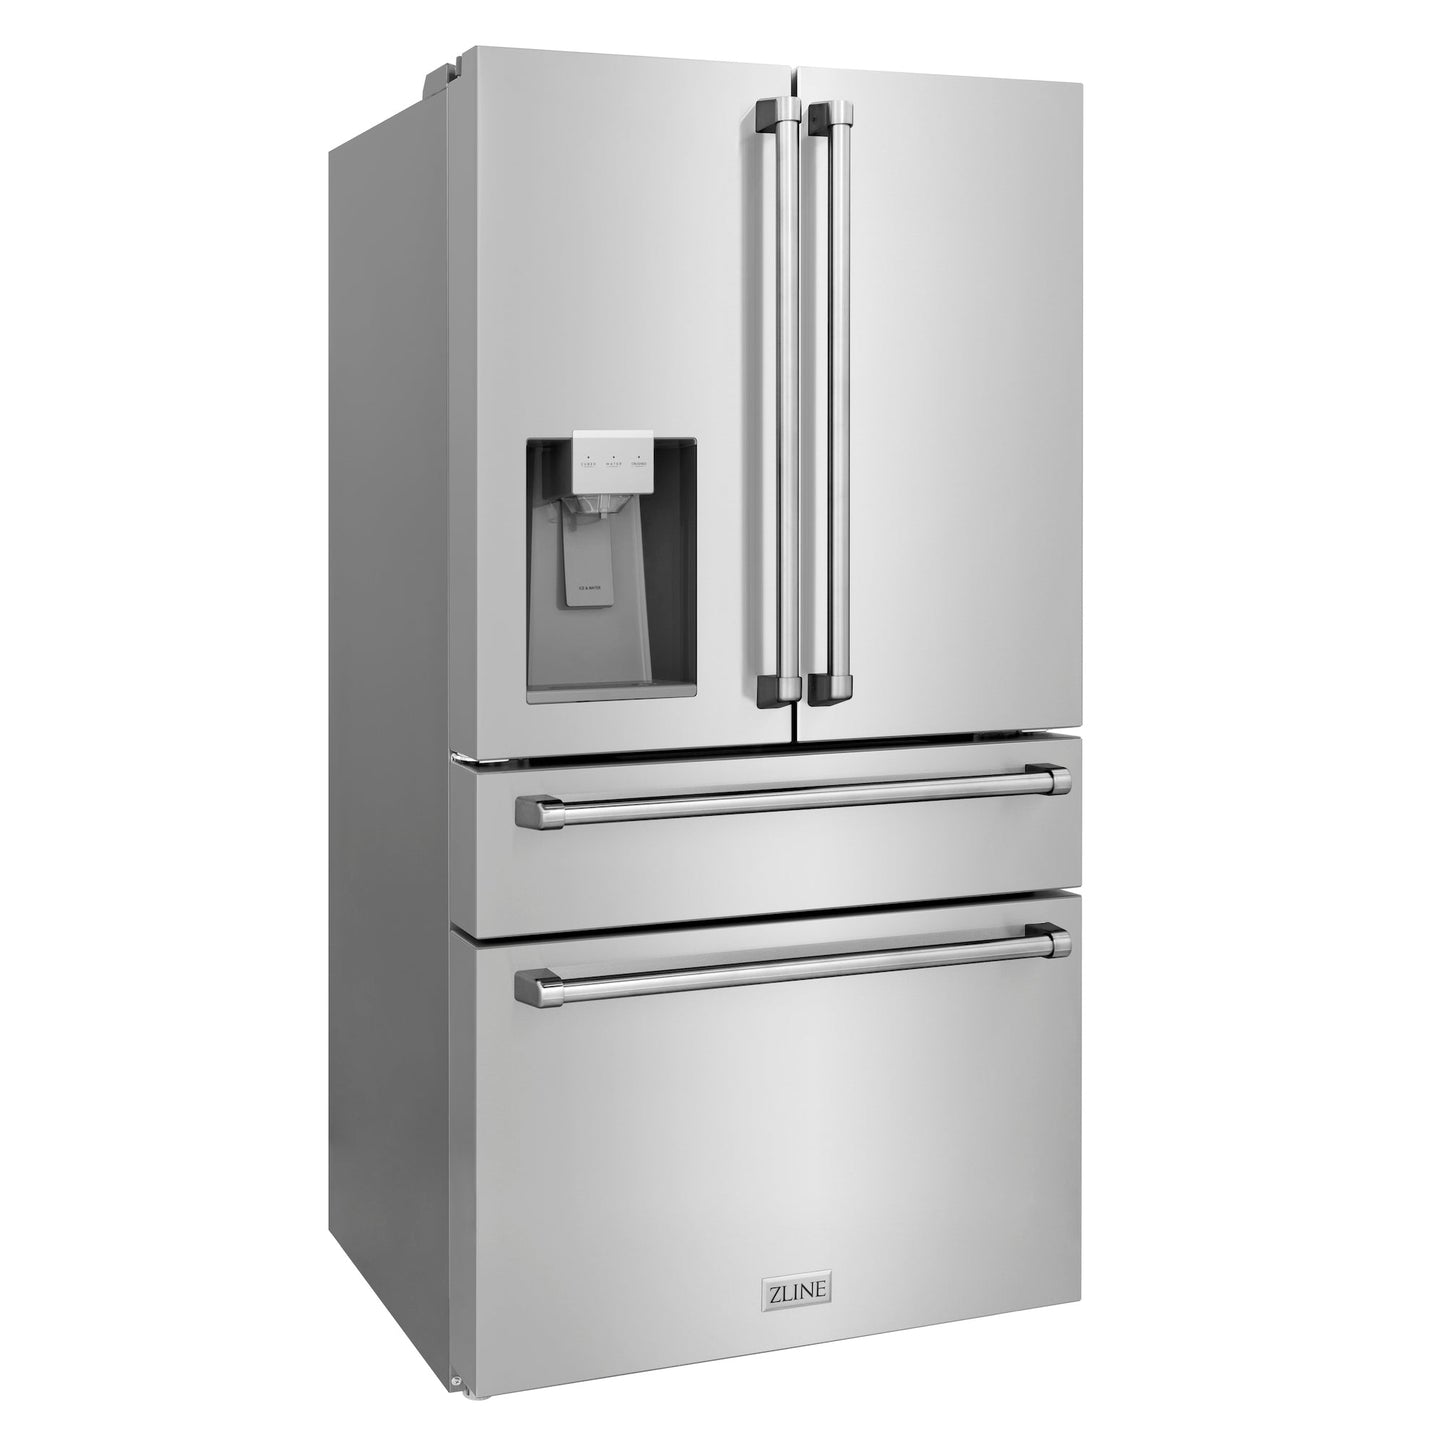 ZLINE 36" 21.6 cu. ft. French Door Refrigerator with Water and Ice Dispenser and Water Filter in Stainless Steel, RFM-W-WF-36